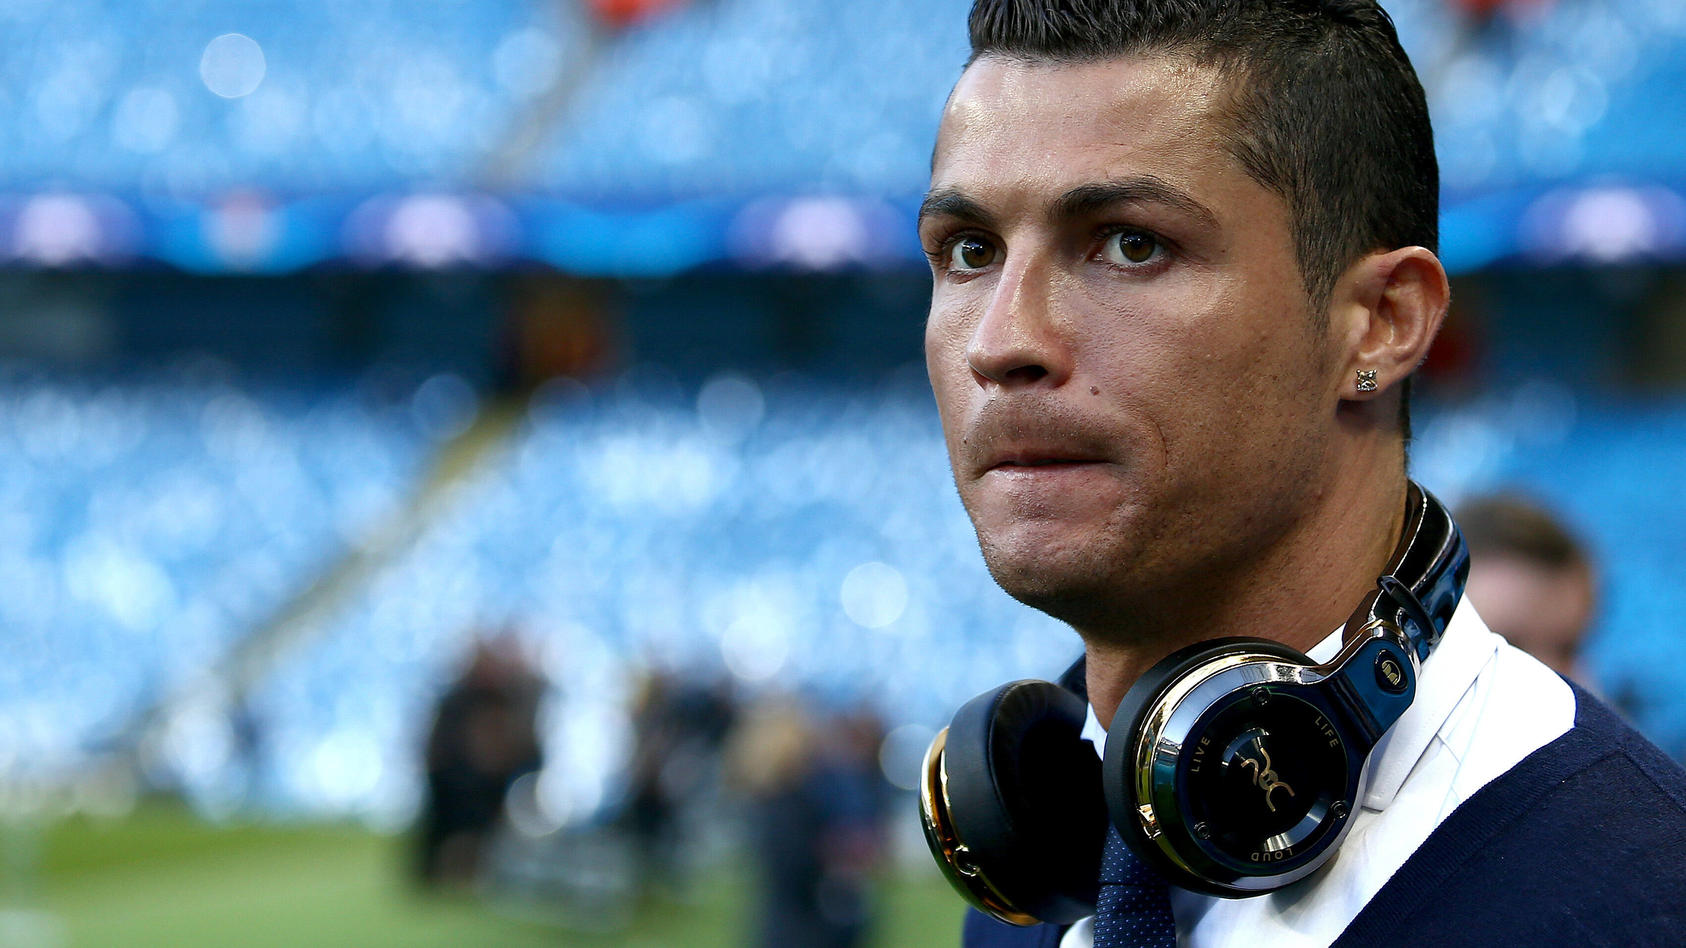 Mandatory Credit: Photo by Javier Garcia/BPI/Shutterstock 5661890j Cristiano Ronaldo of Real Madrid looks on before the UEFA Champions League Semi Final First Leg match between Manchester City and Real Madrid played at The Etihad Stadium, Manchester 